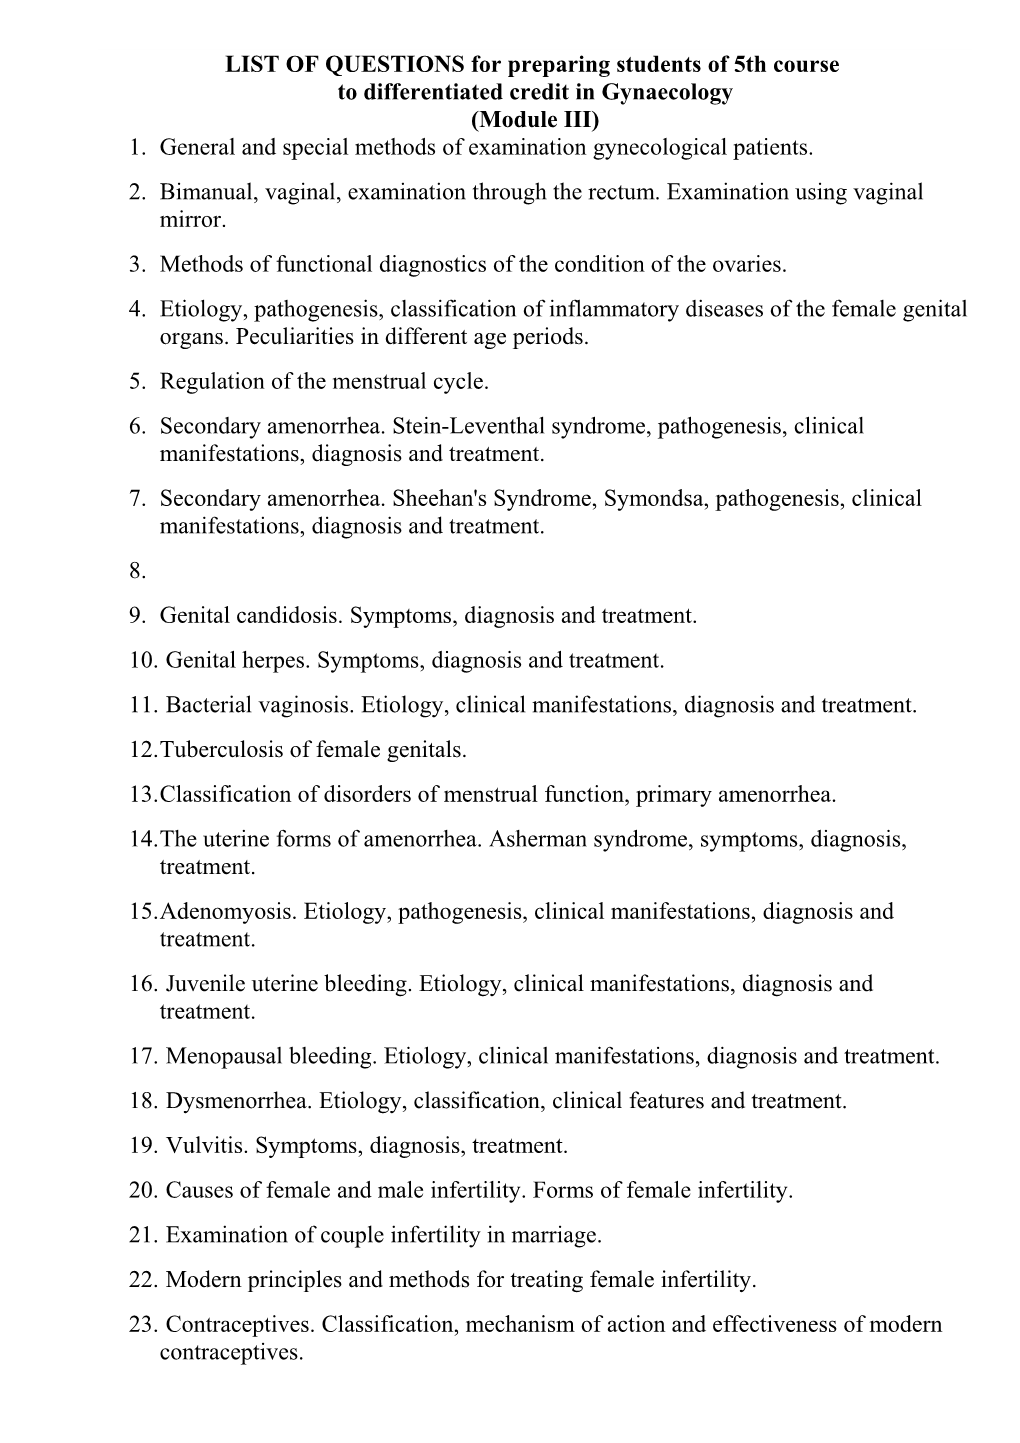 LIST of QUESTIONS for Preparing Students of 5Th Course